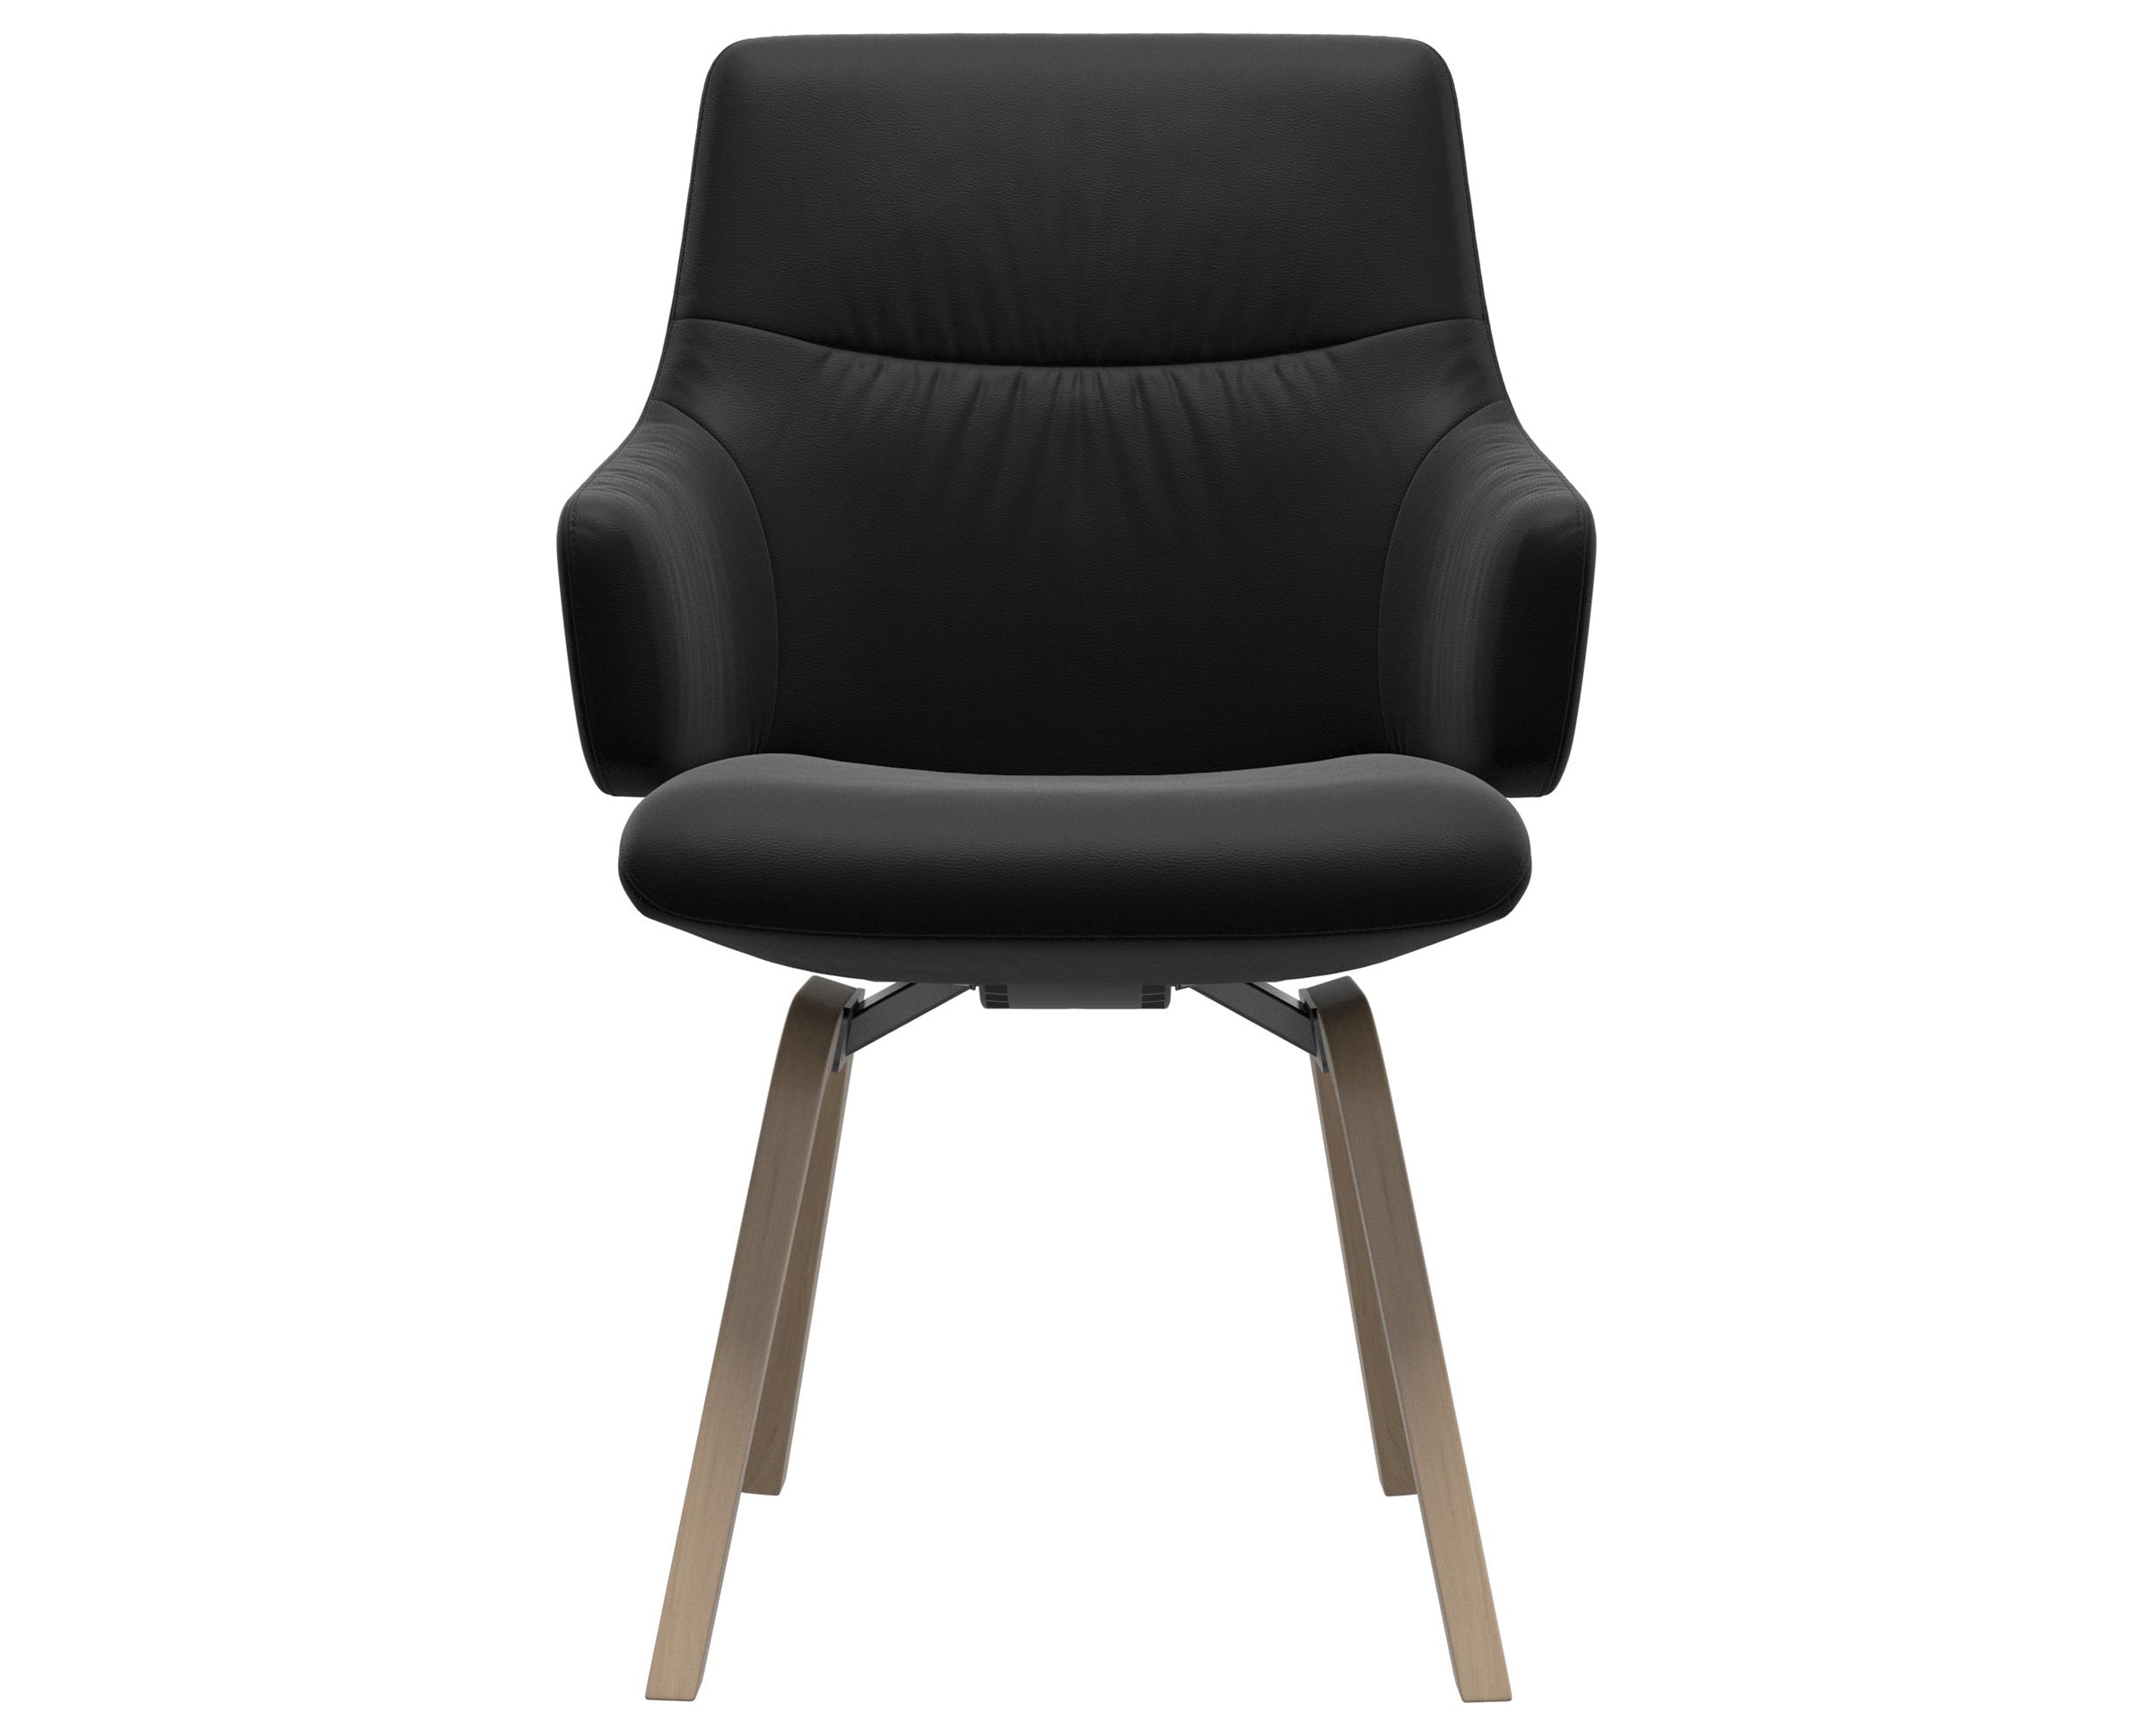 Paloma Leather Black and Natural Base | Stressless Mint Low Back D200 Dining Chair w/Arms | Valley Ridge Furniture